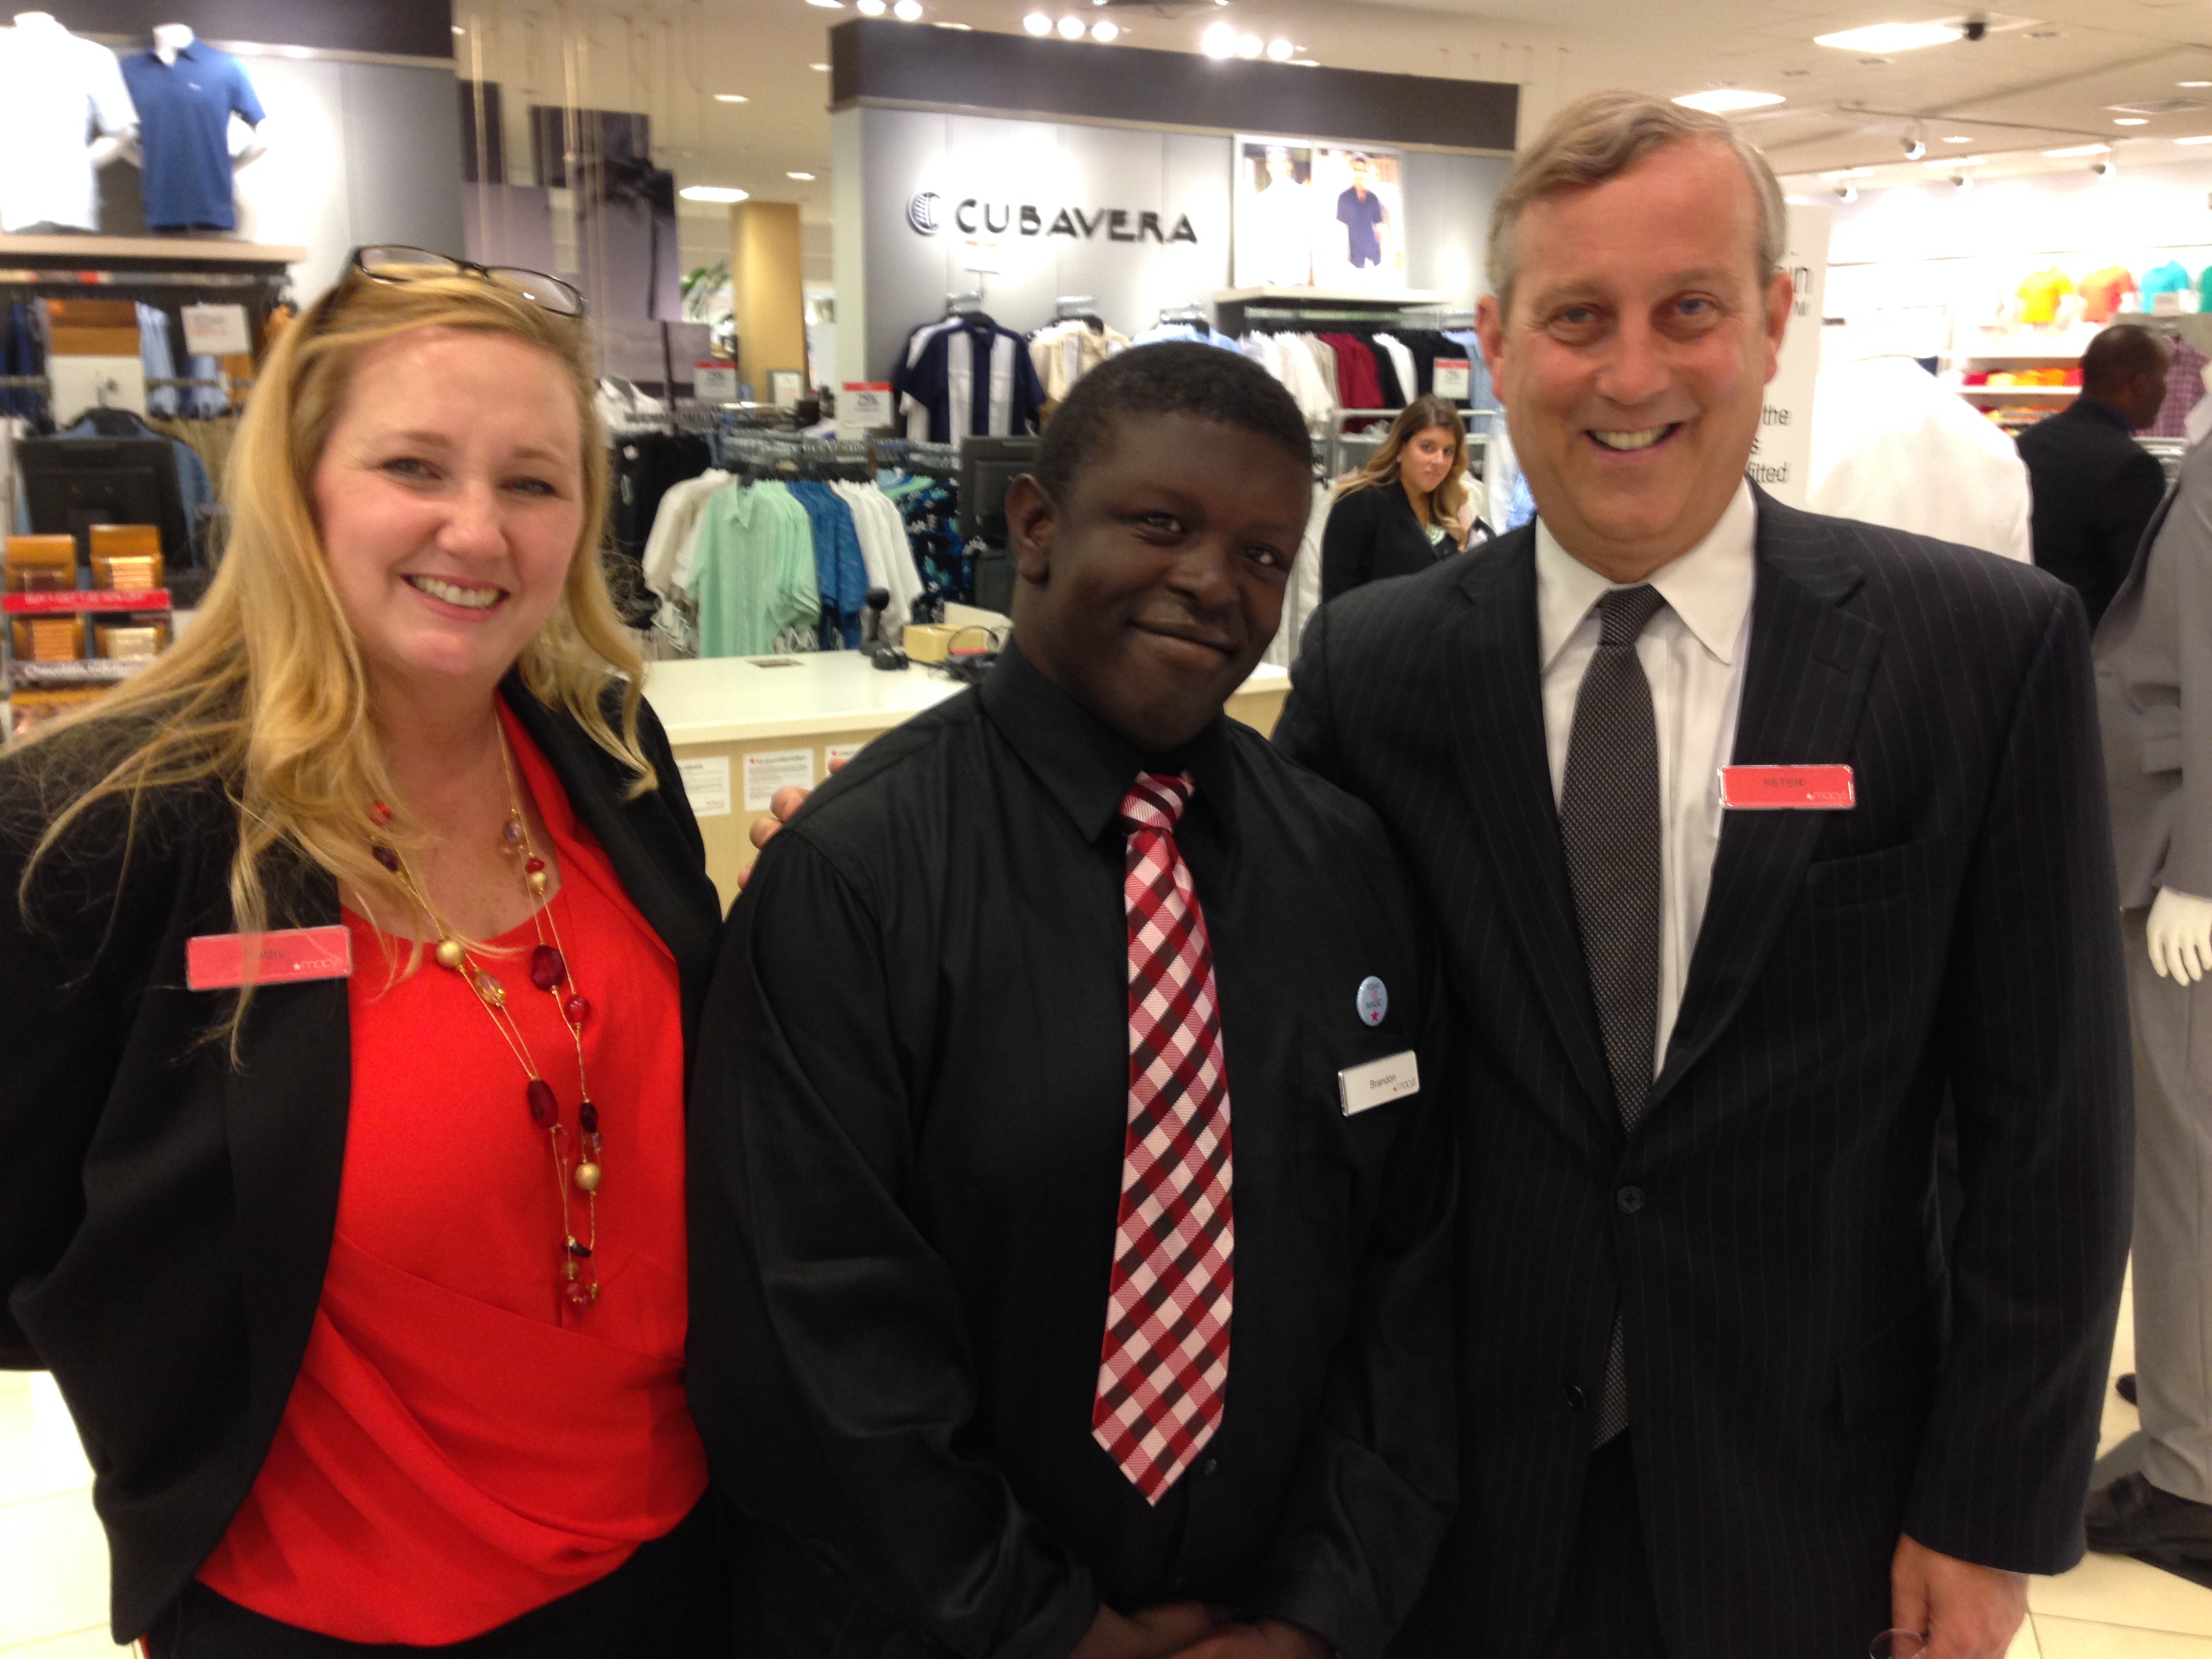 Brandon Jackson (center) with Macy’s Store Manager Kathy Clarke and Macy’s President Peter Sachse at the Boca Raton store.
 